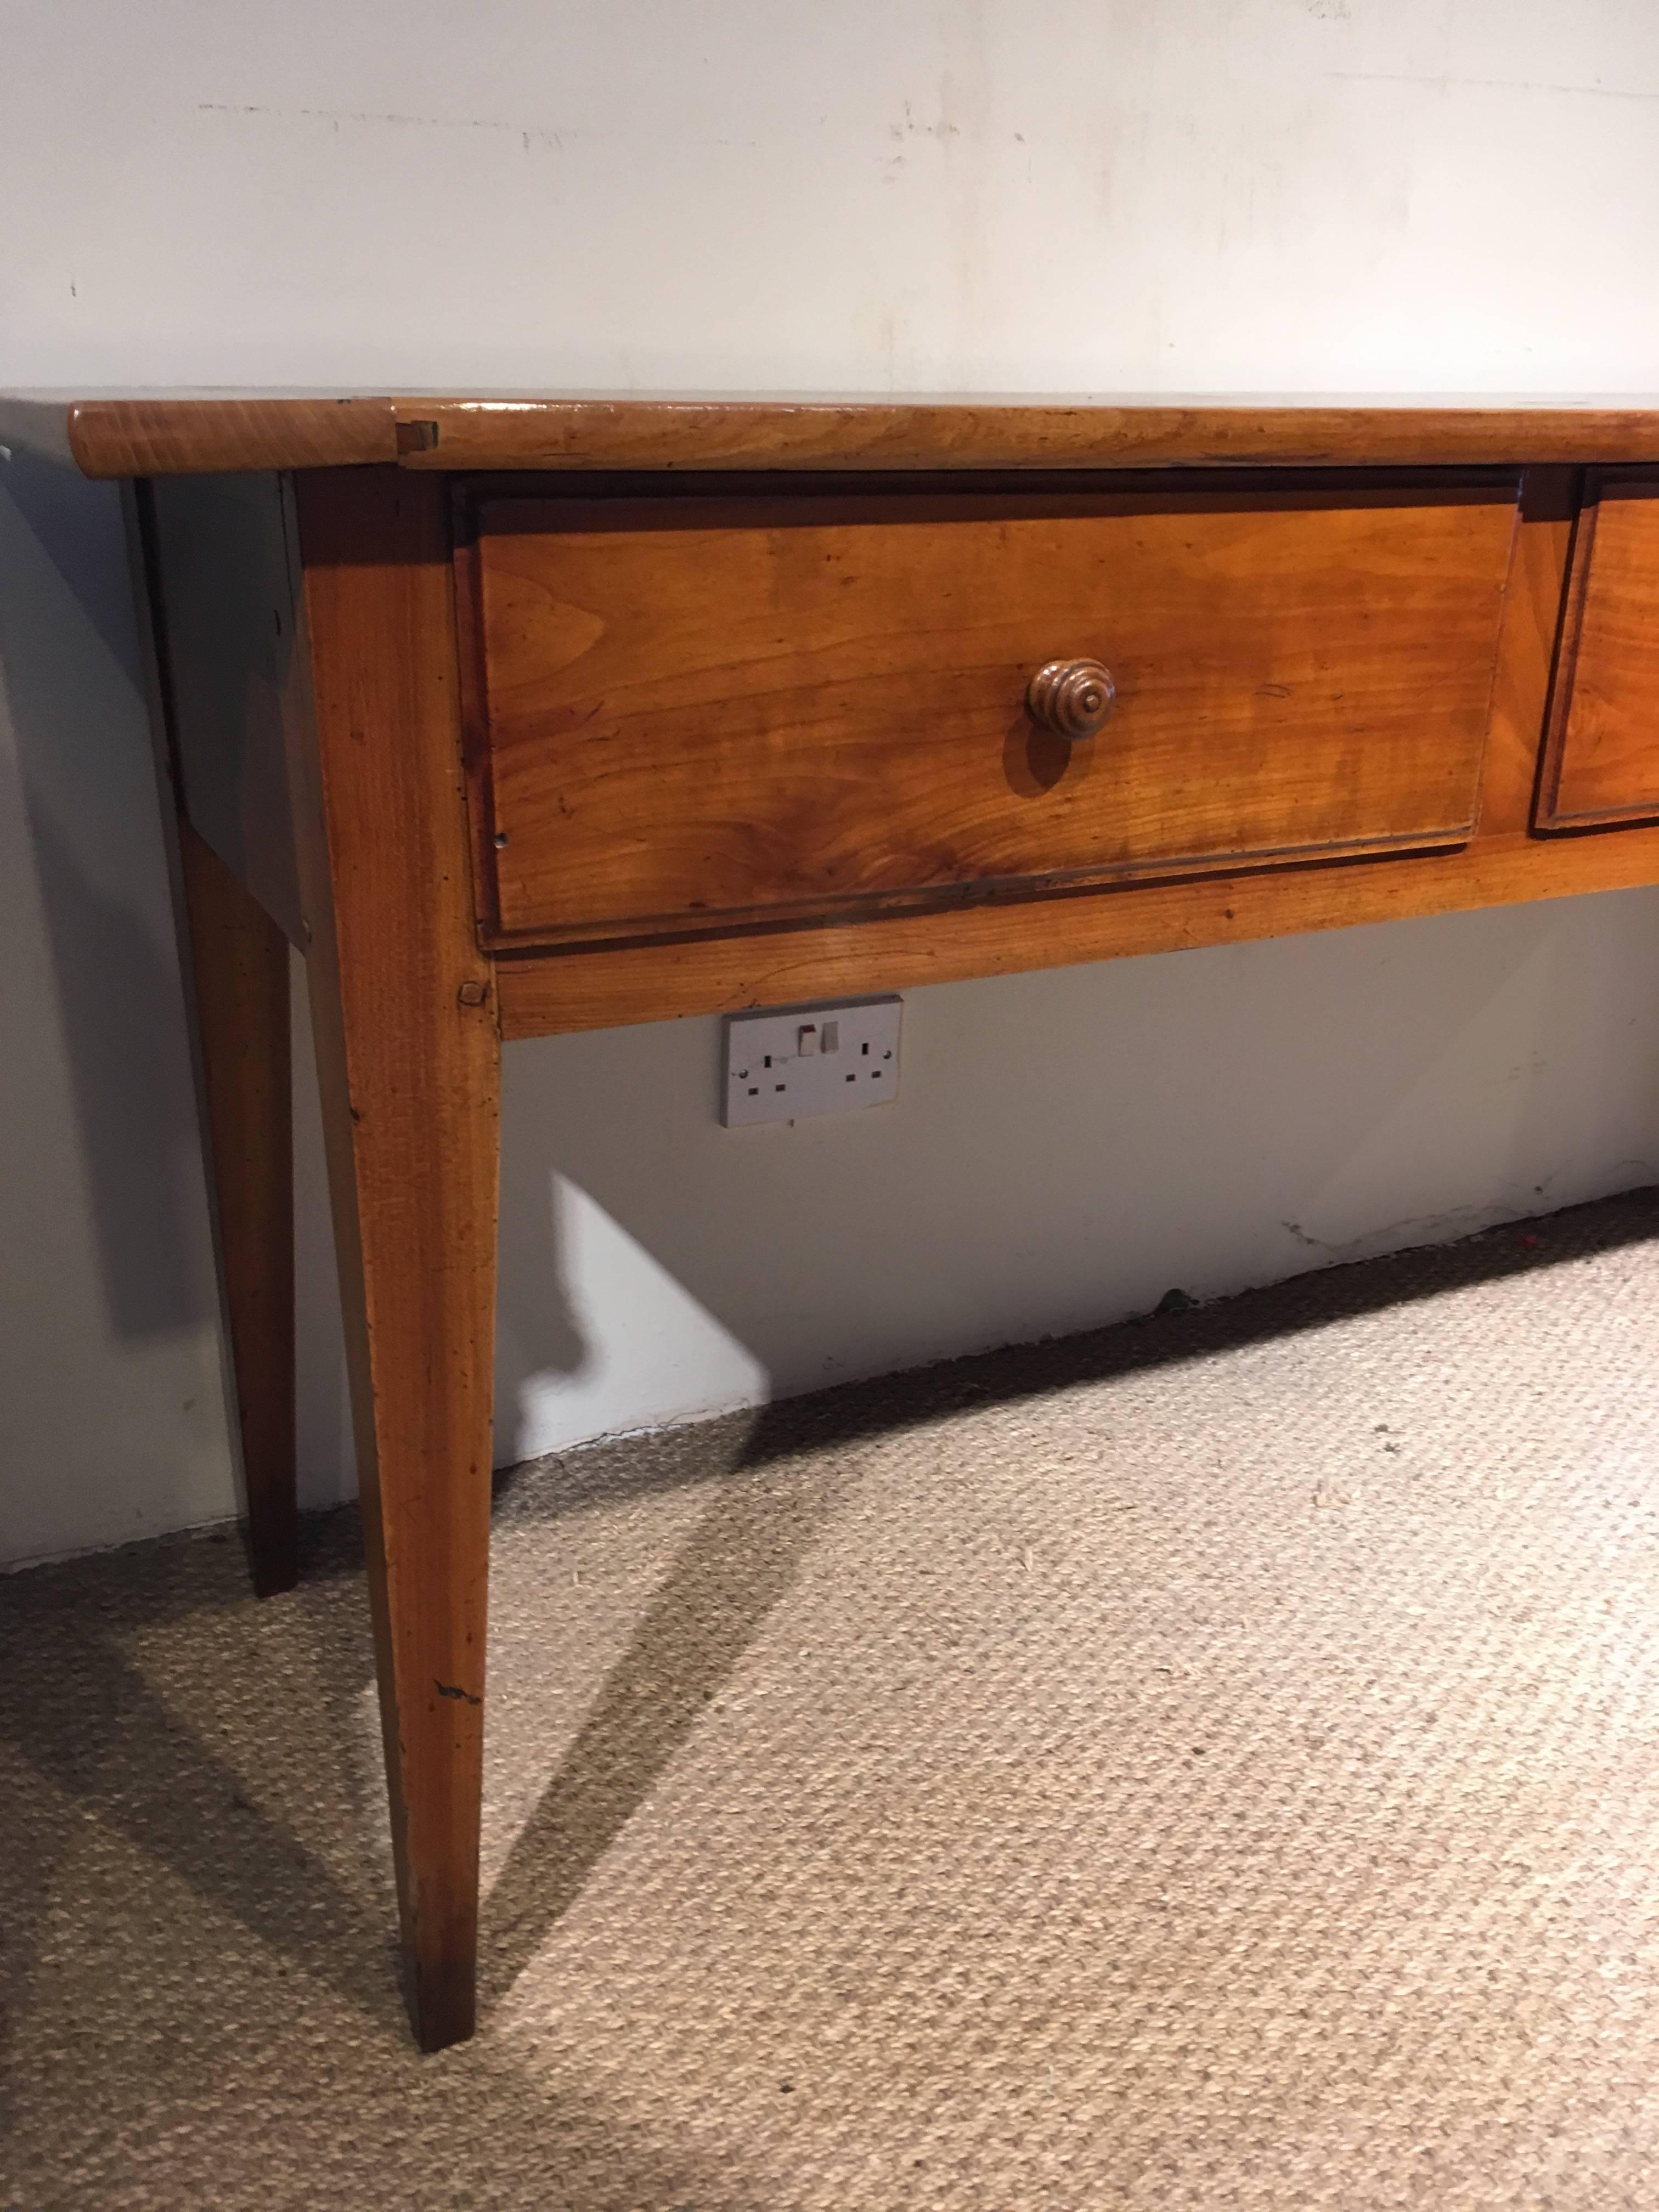 Fabulous neat sized 19th century cheerywood server or dresser base 

French dating circa 1860s having original turned handles solid cheerywood 

The drawers are lined with chestnut and cherry, the planked top having cleated ends 

Has been